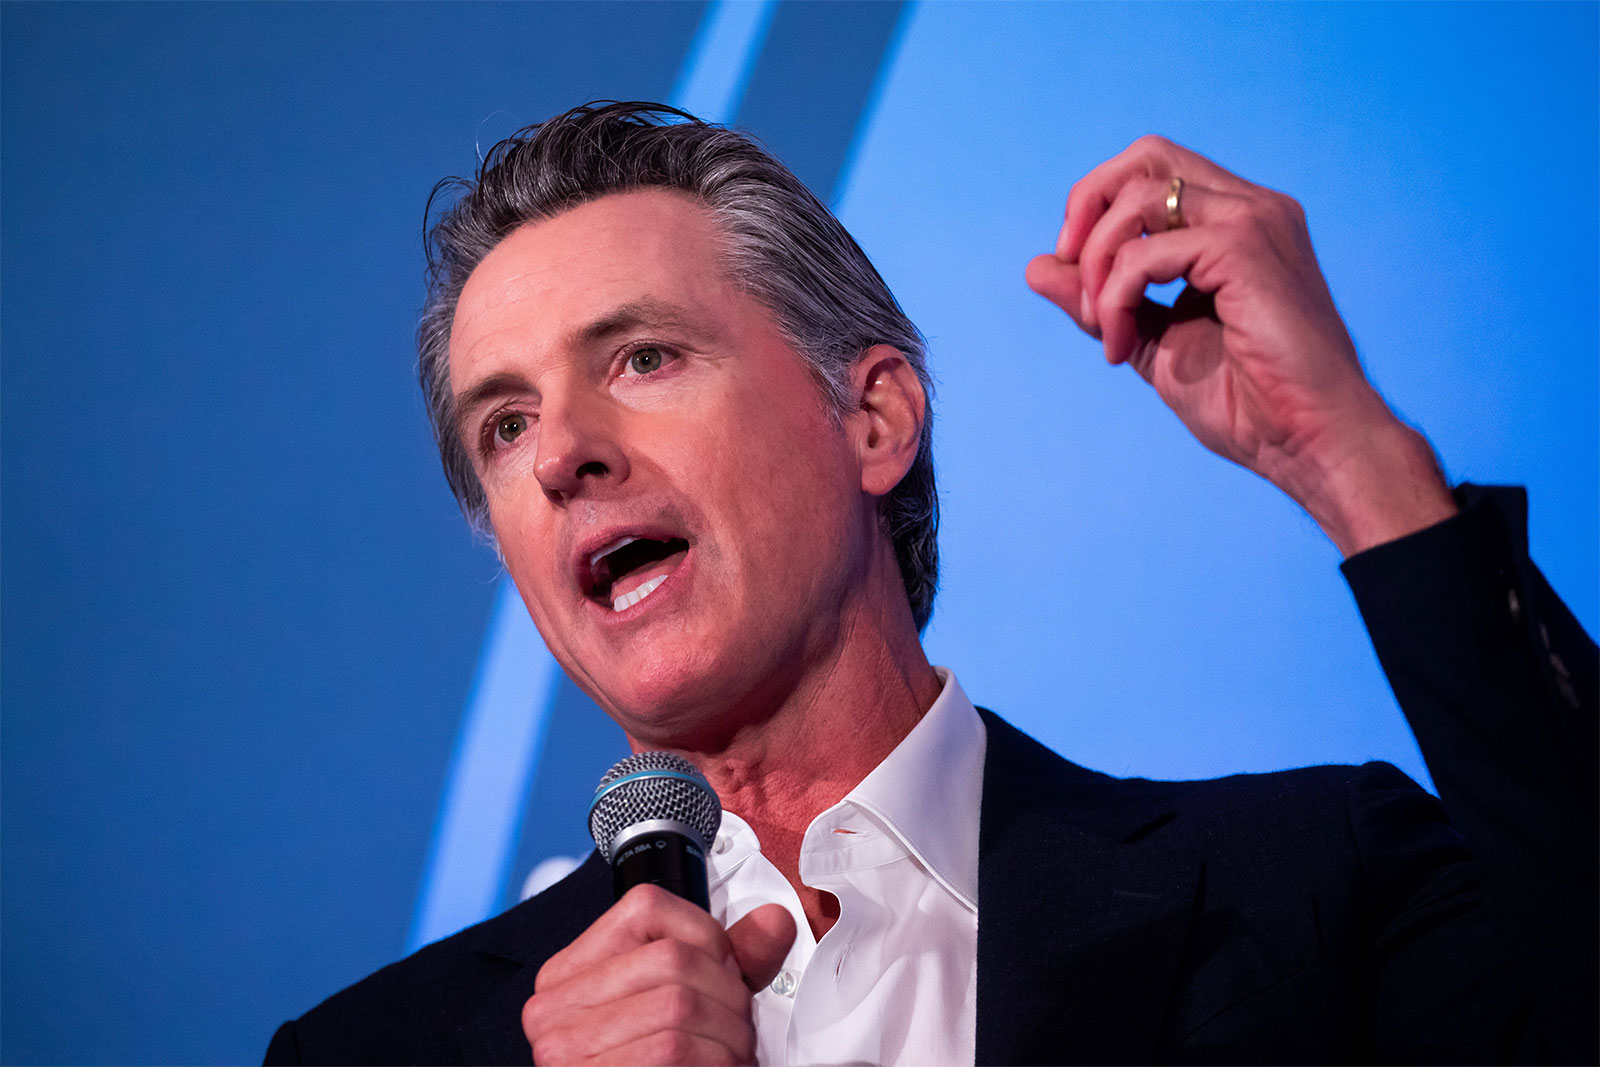 California Gov. Gavin Newsom speaks into a microphone held in his right hand and gestures with his left hand.